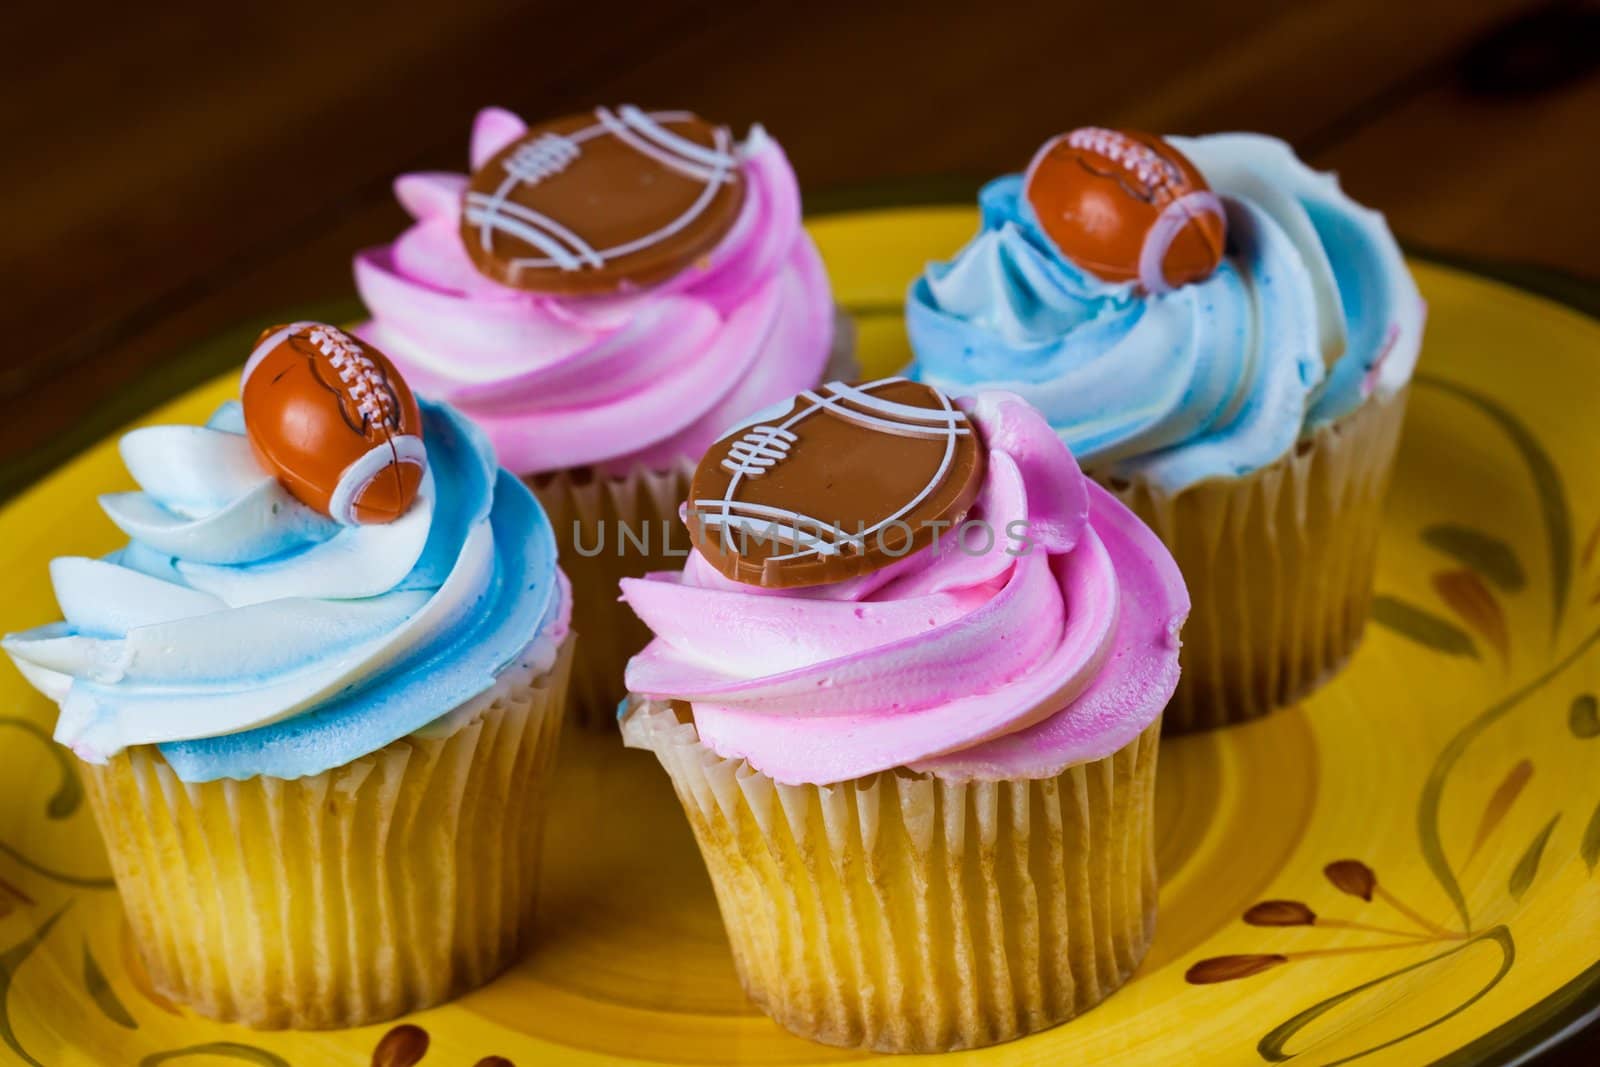 Close up of a cup cake on the wooden table